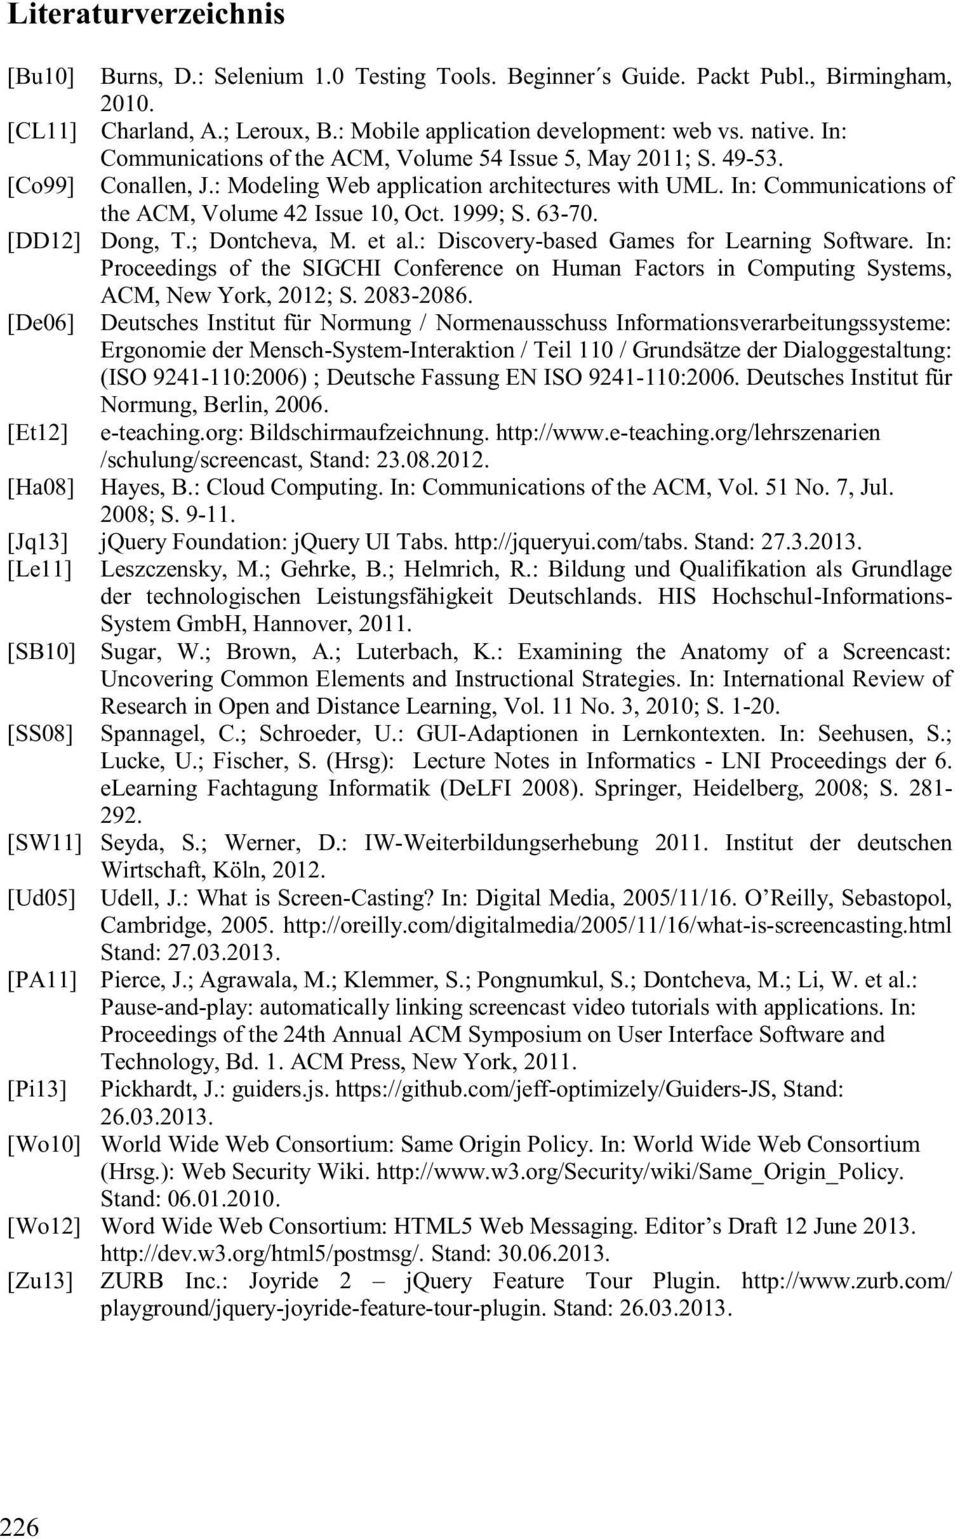 [DD12] Dong, T.; Dontcheva, M.et al.: Discovery-based Games for LearningSoftware. In: Proceedings ofthesigchi Conference on Human Factors in ComputingSystems, ACM, NewYork, 2012;S. 2083-2086.